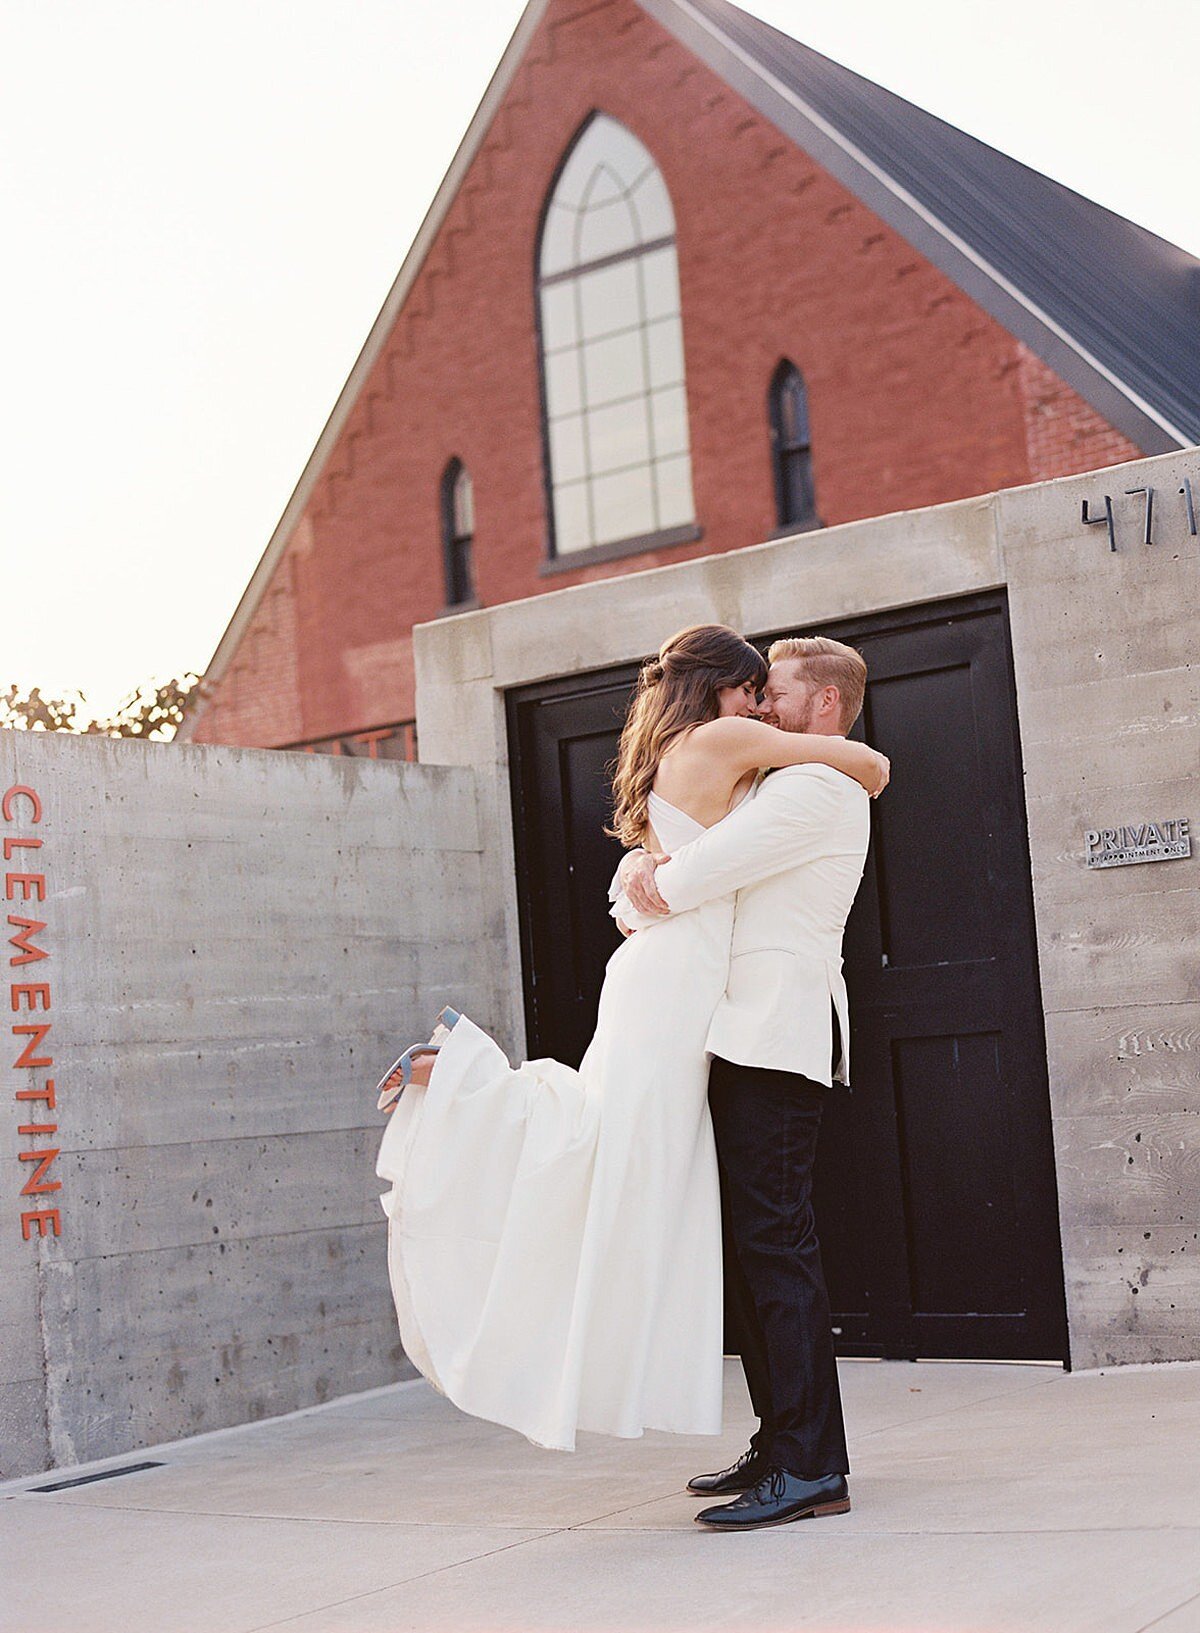 The bride, a brunette, wearing a silk halter top sheath dress embraces the groom who is wearing a tuxedo with a white jacket as he lifts her up off the ground and twirls her around. The gray walls of the entry of Clementine Hall are accented with the word Clementine written in orange. The exposed red brick pediment of the building rises above them.